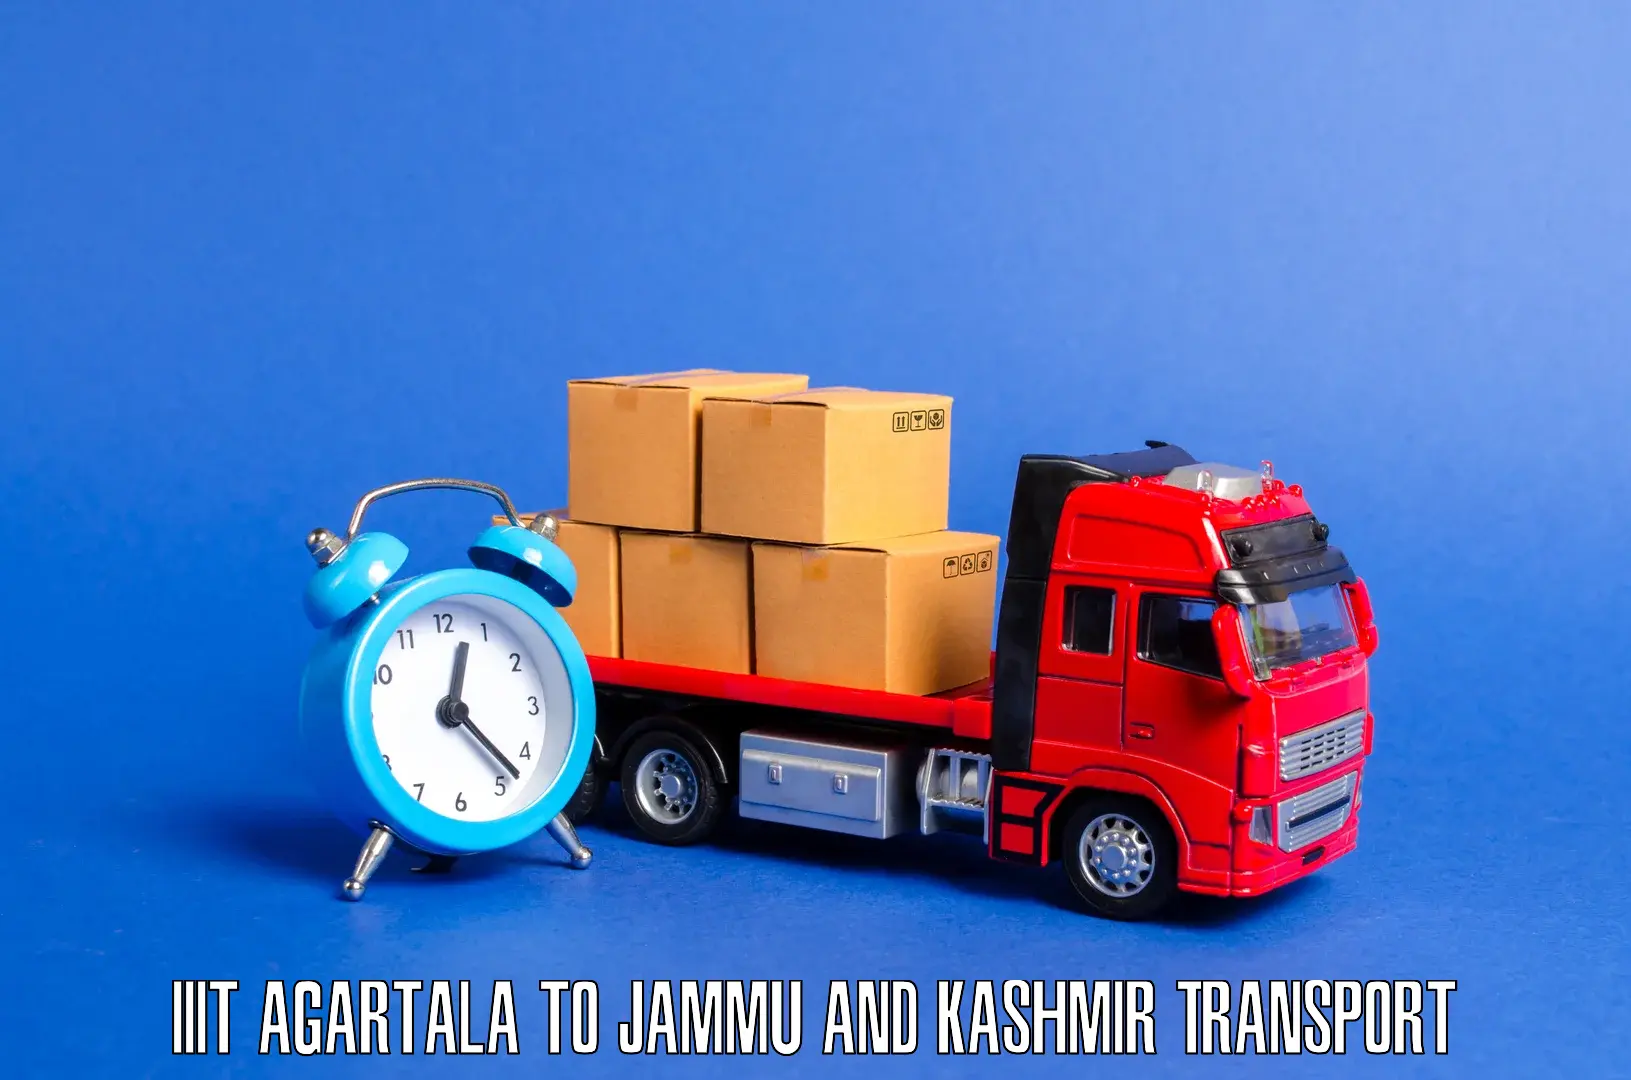 Cargo transport services in IIIT Agartala to Udhampur